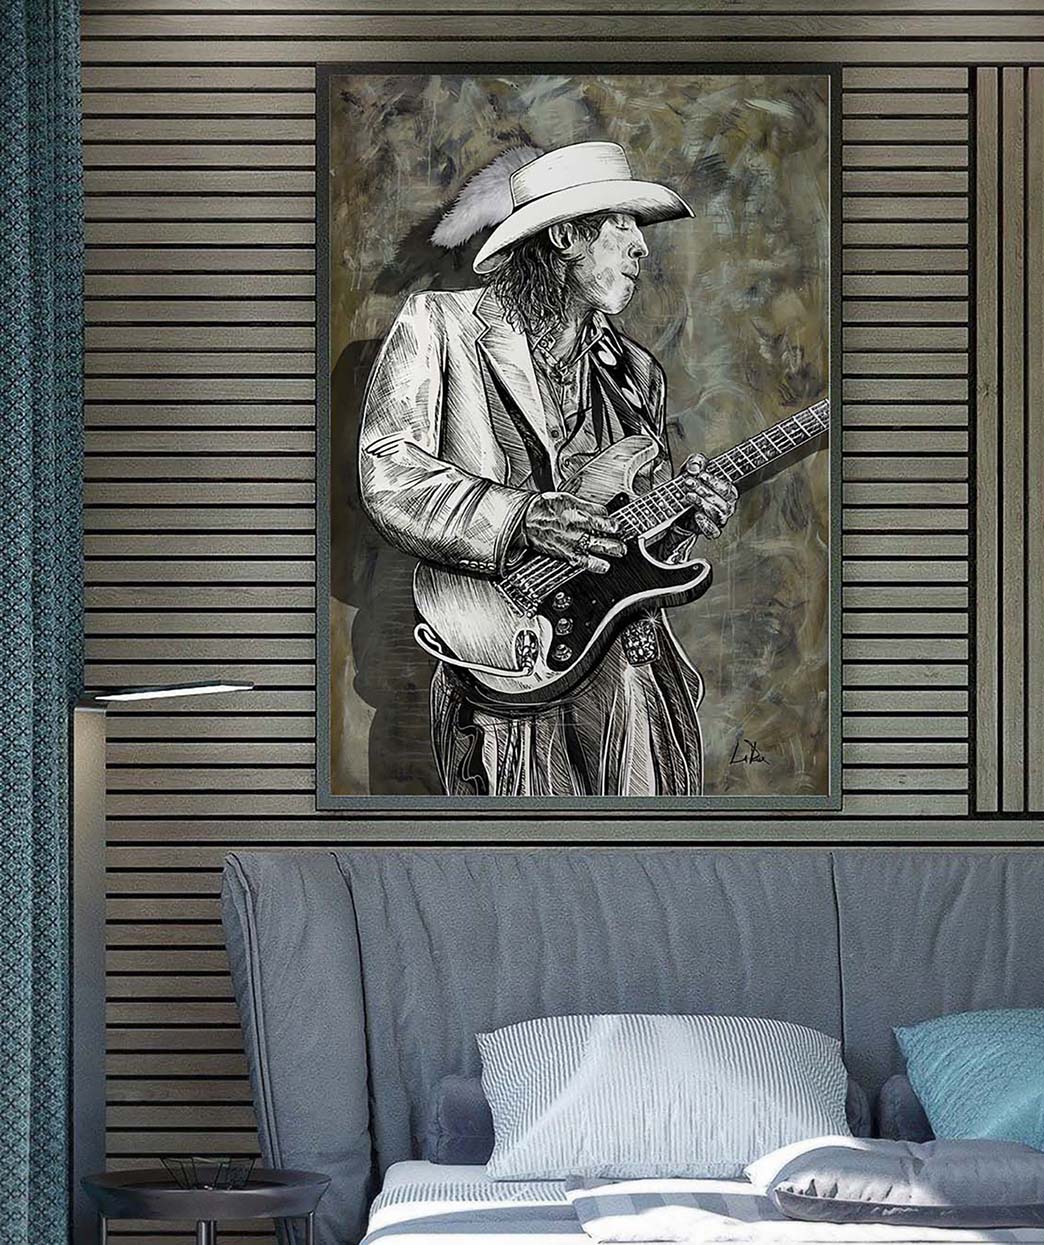 Stevie Ray Vaughan 22 artwork by Doug LaRue in a modern bedroom over a bed